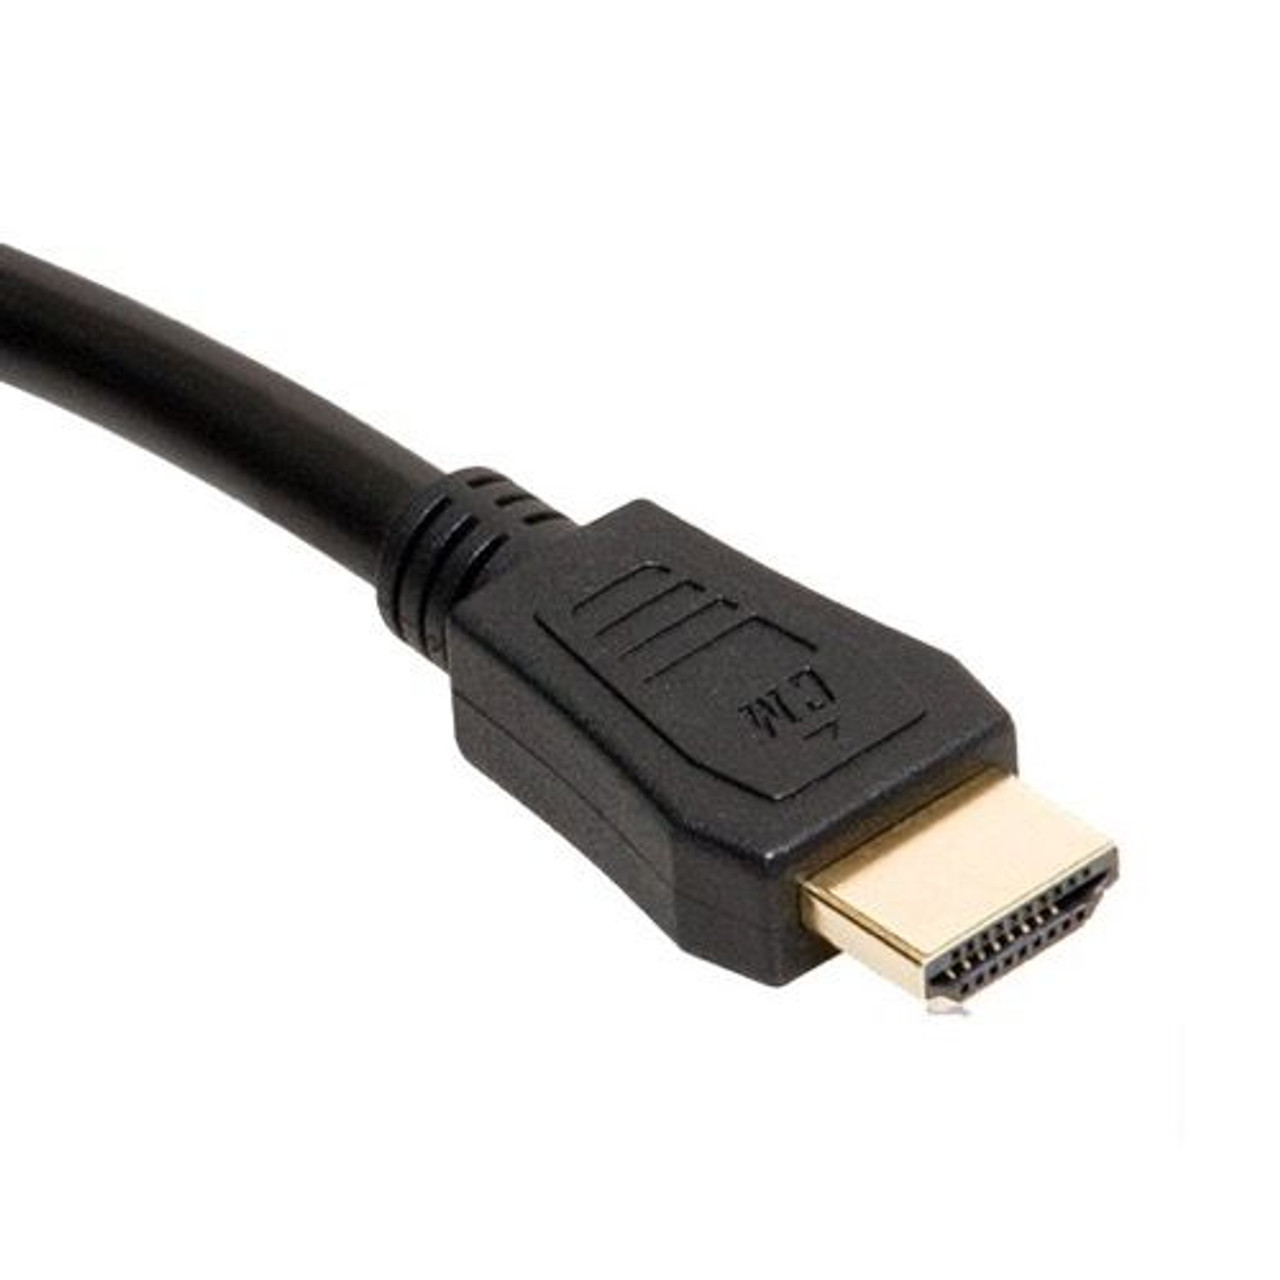 50' FT HDMI to HDMI Cable Assembly 15 Meter Gold Plate Male to Male 1.3 Approved 1080p 26 AWG Pure Copper Video Resolution High Definition Multi-Media Interface Interconnect